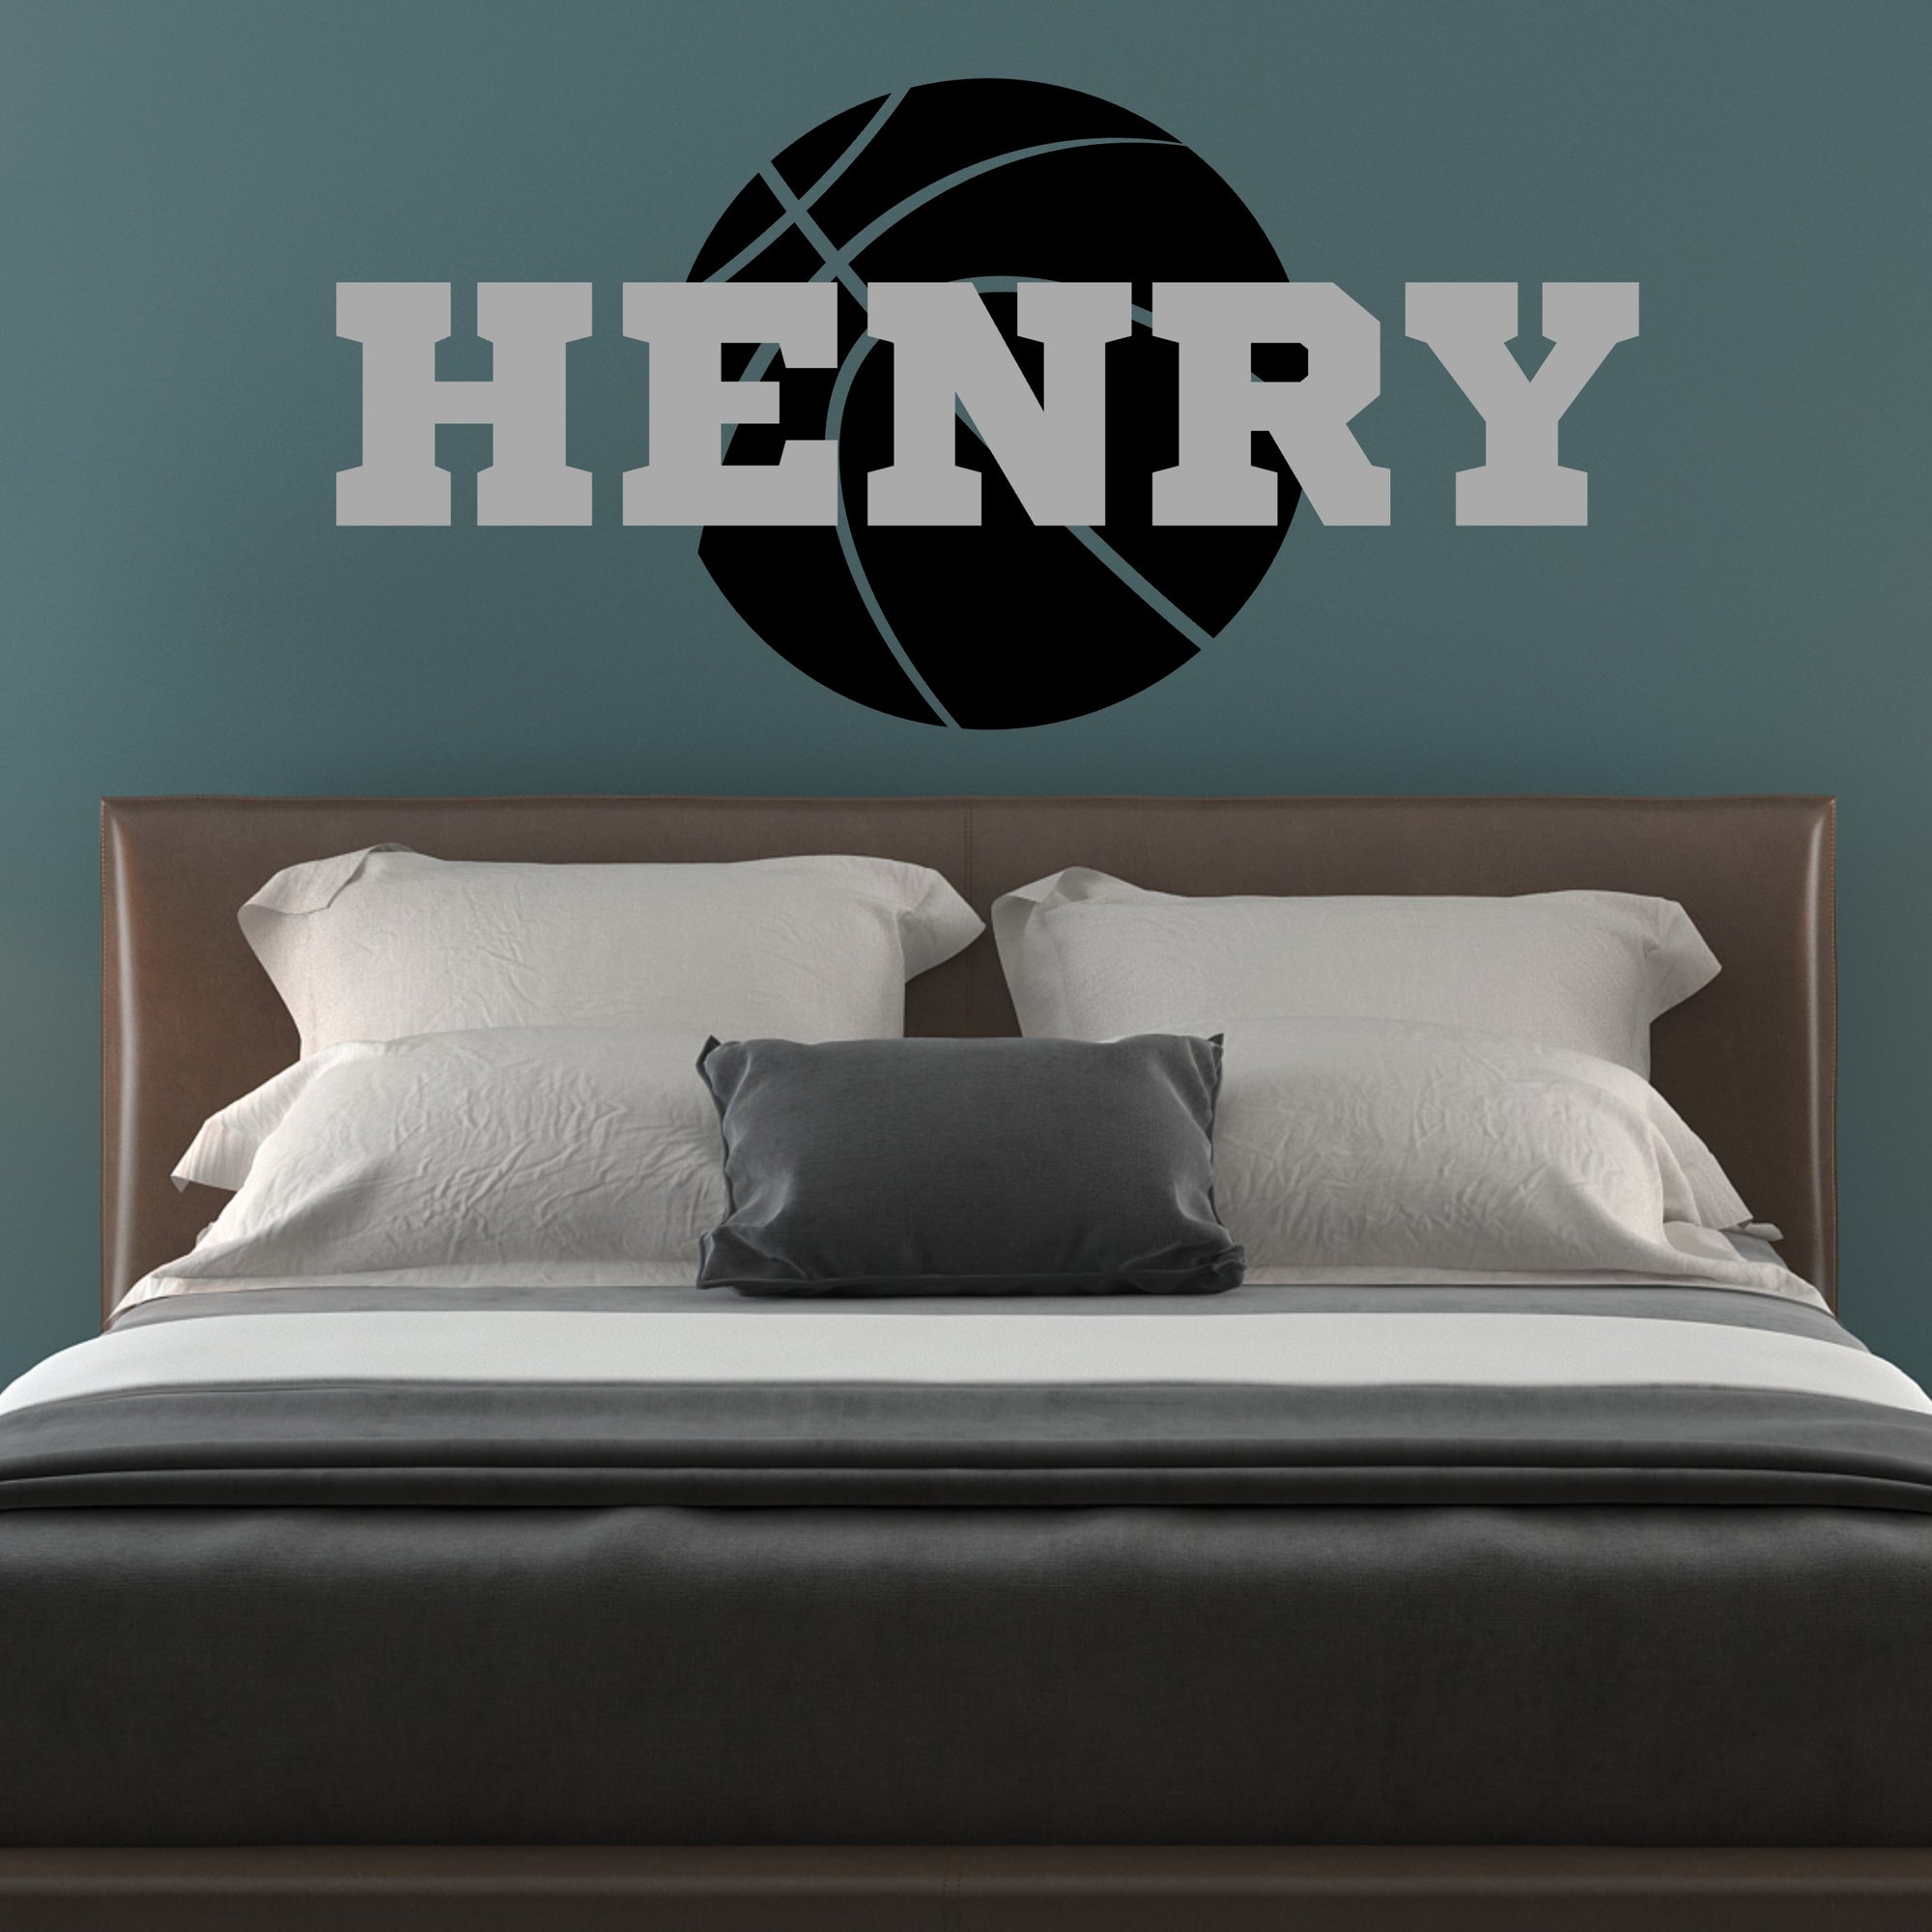 Basketball Wall Decal with Name - Personalized Gift for Basketball Player